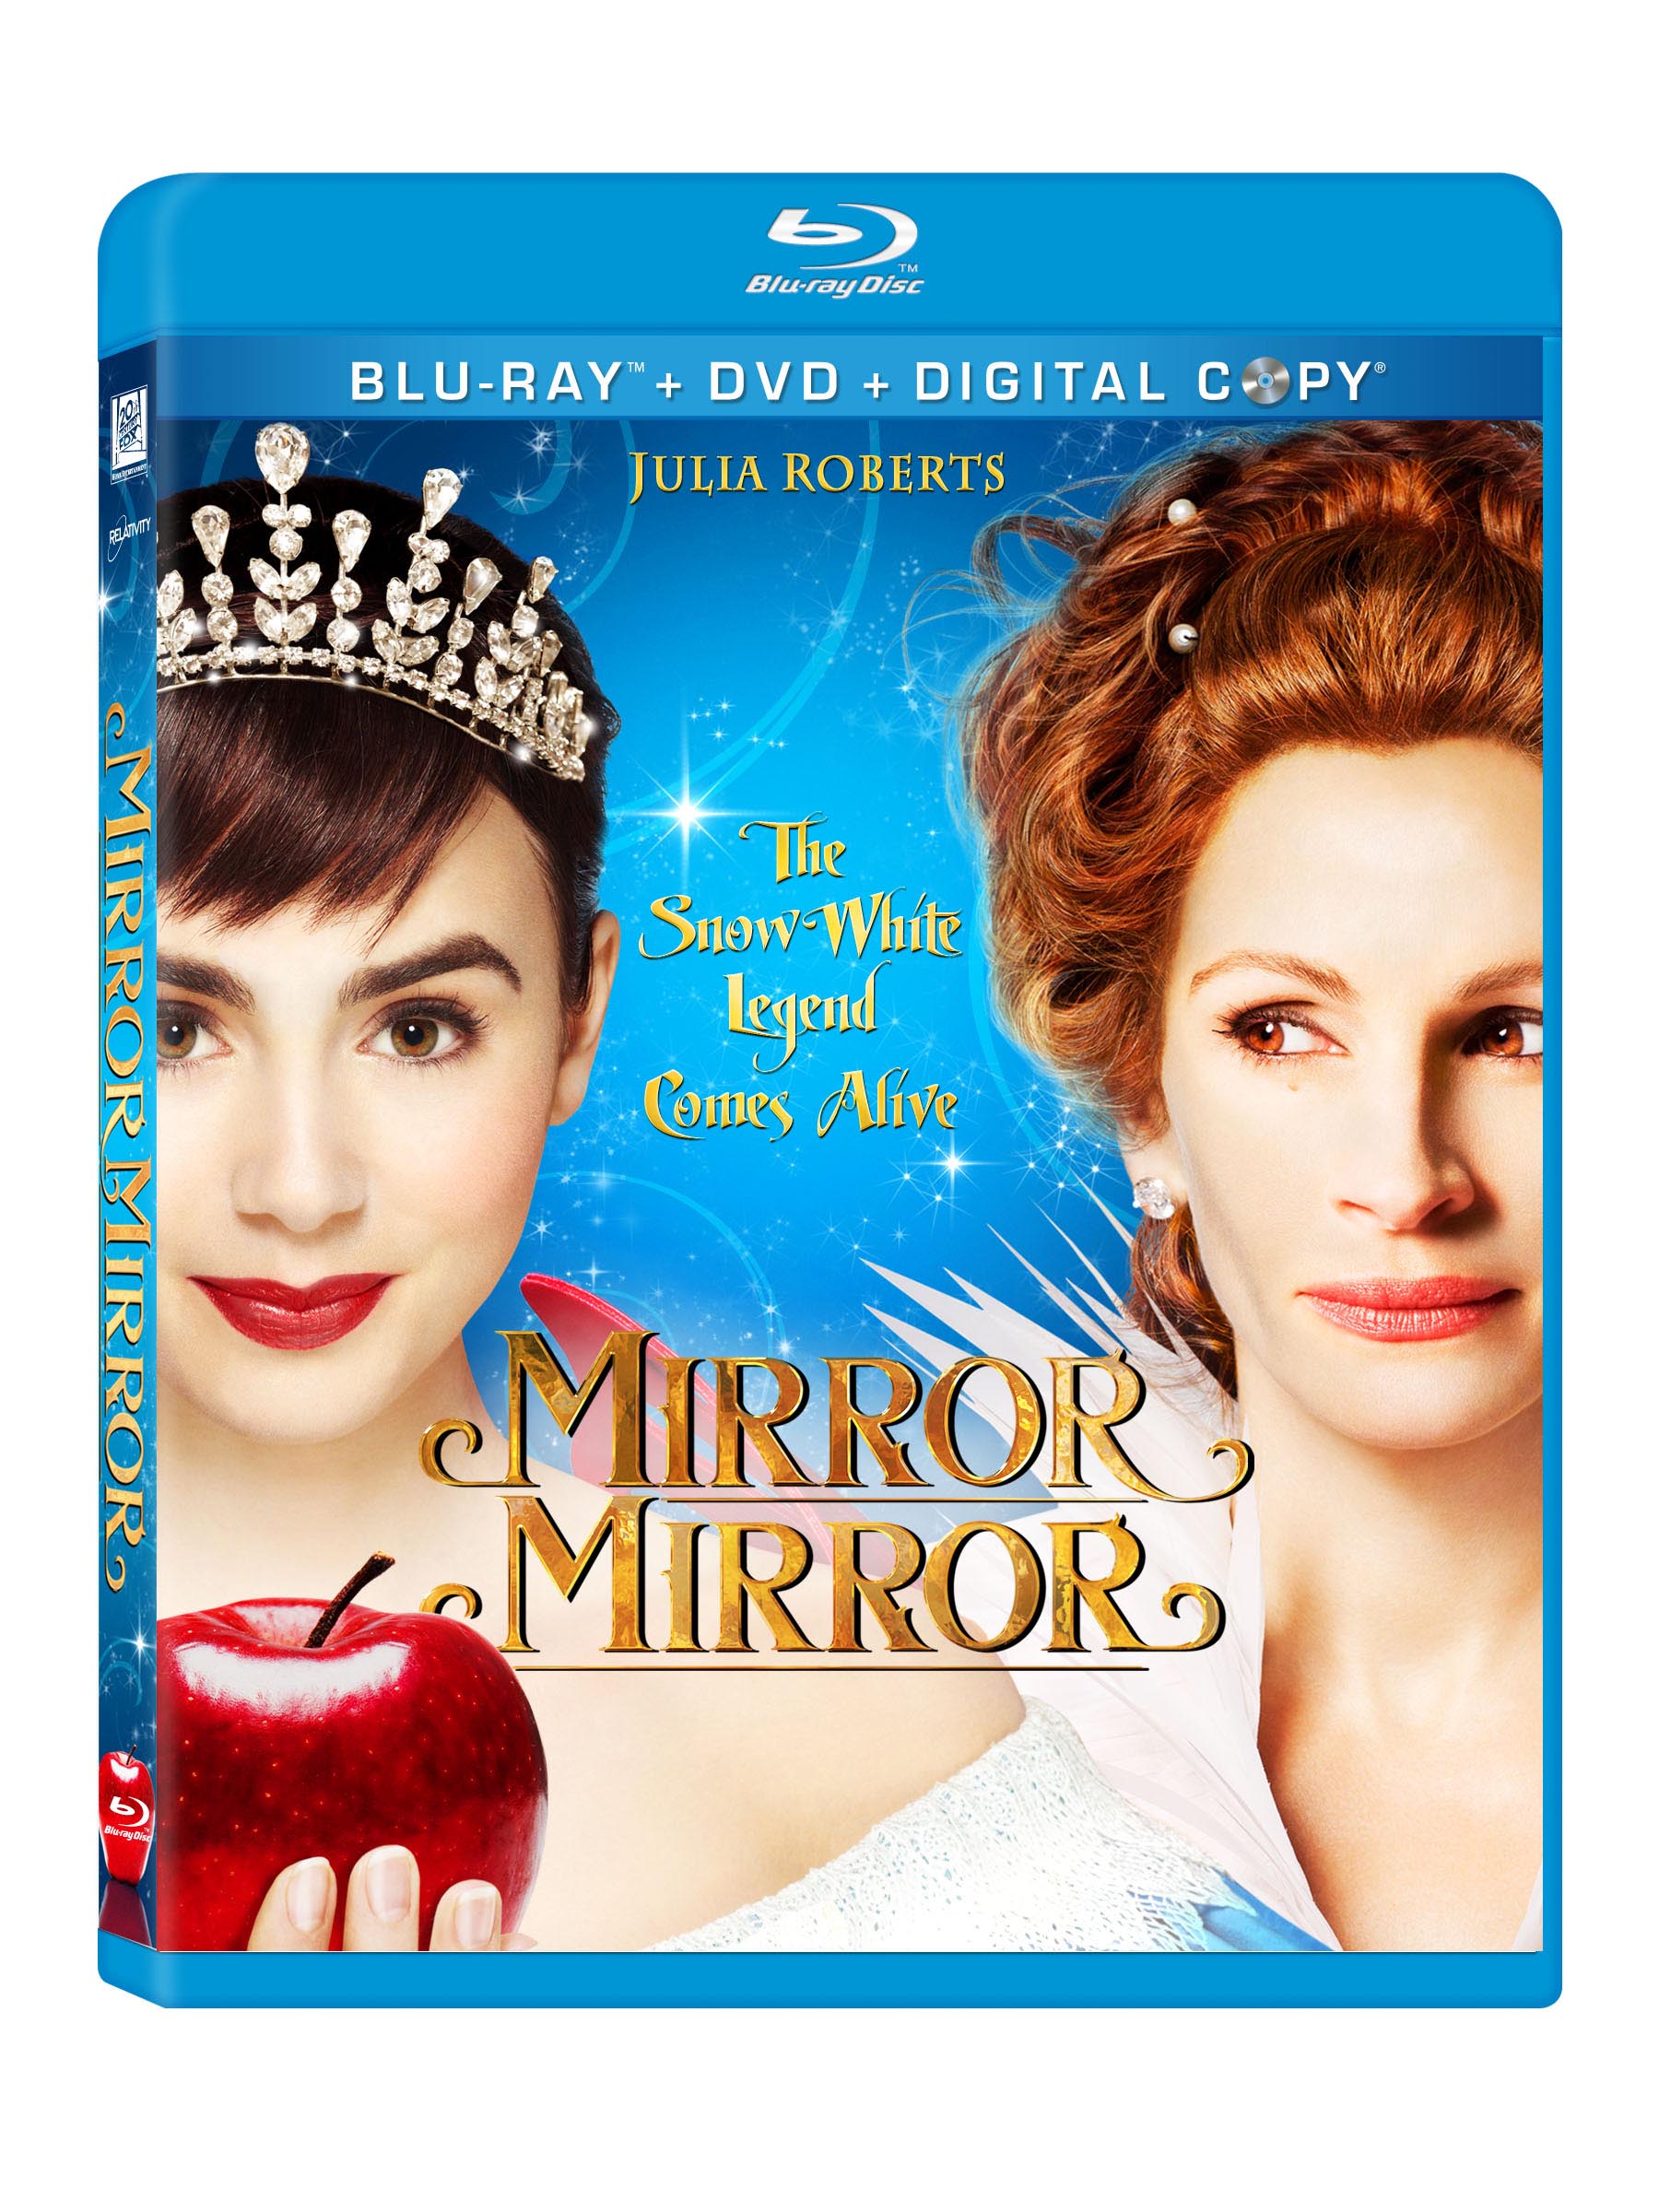 Mirror Mirror Available on Blu-ray/DVD June 26th